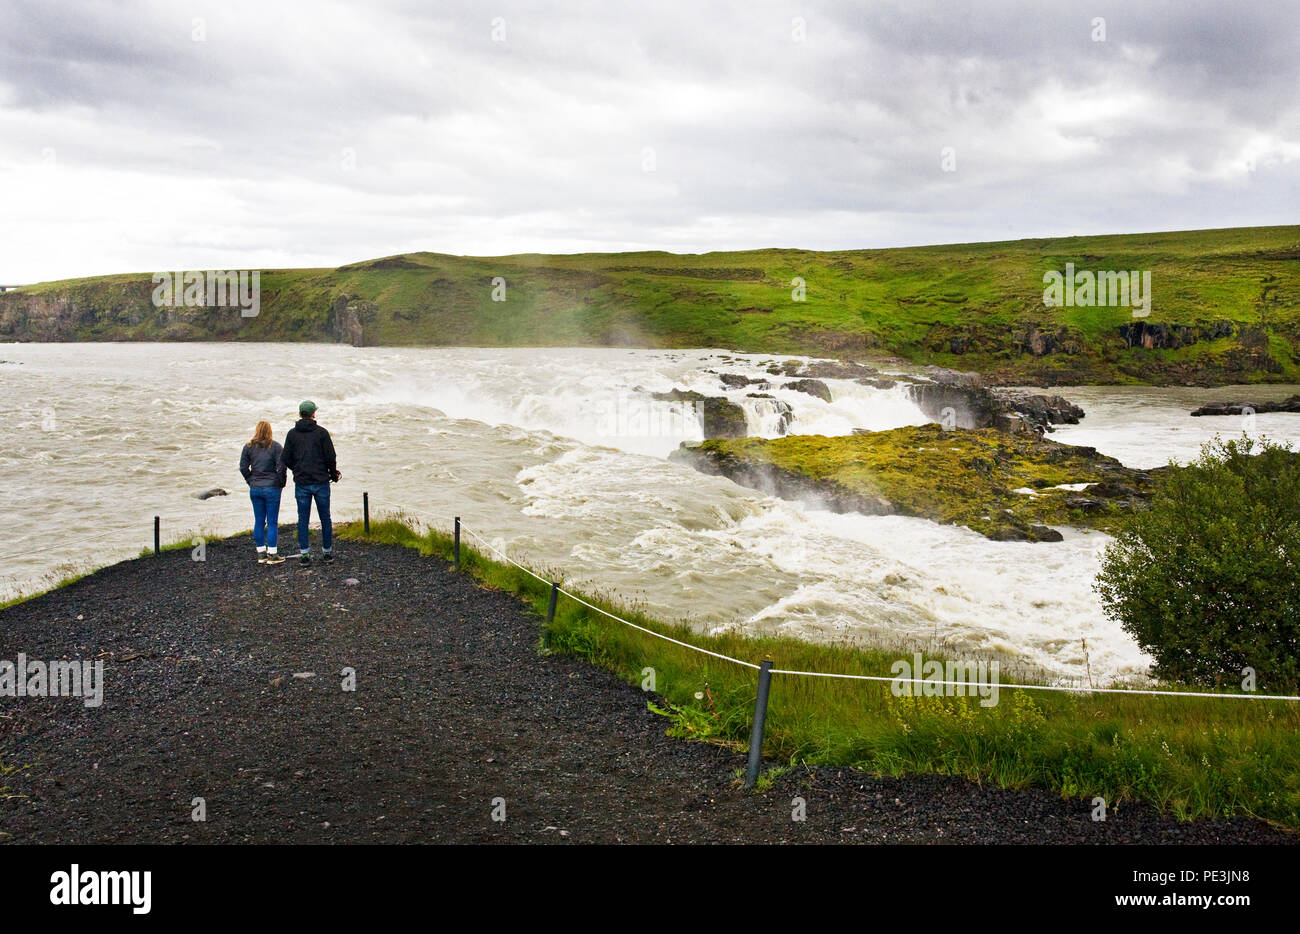 Visitors admire the power of  the Thjorsa River at Urrioafoss Waterfall in southern Iceland. The Thjorsa River is Iceland's longest river. Stock Photo